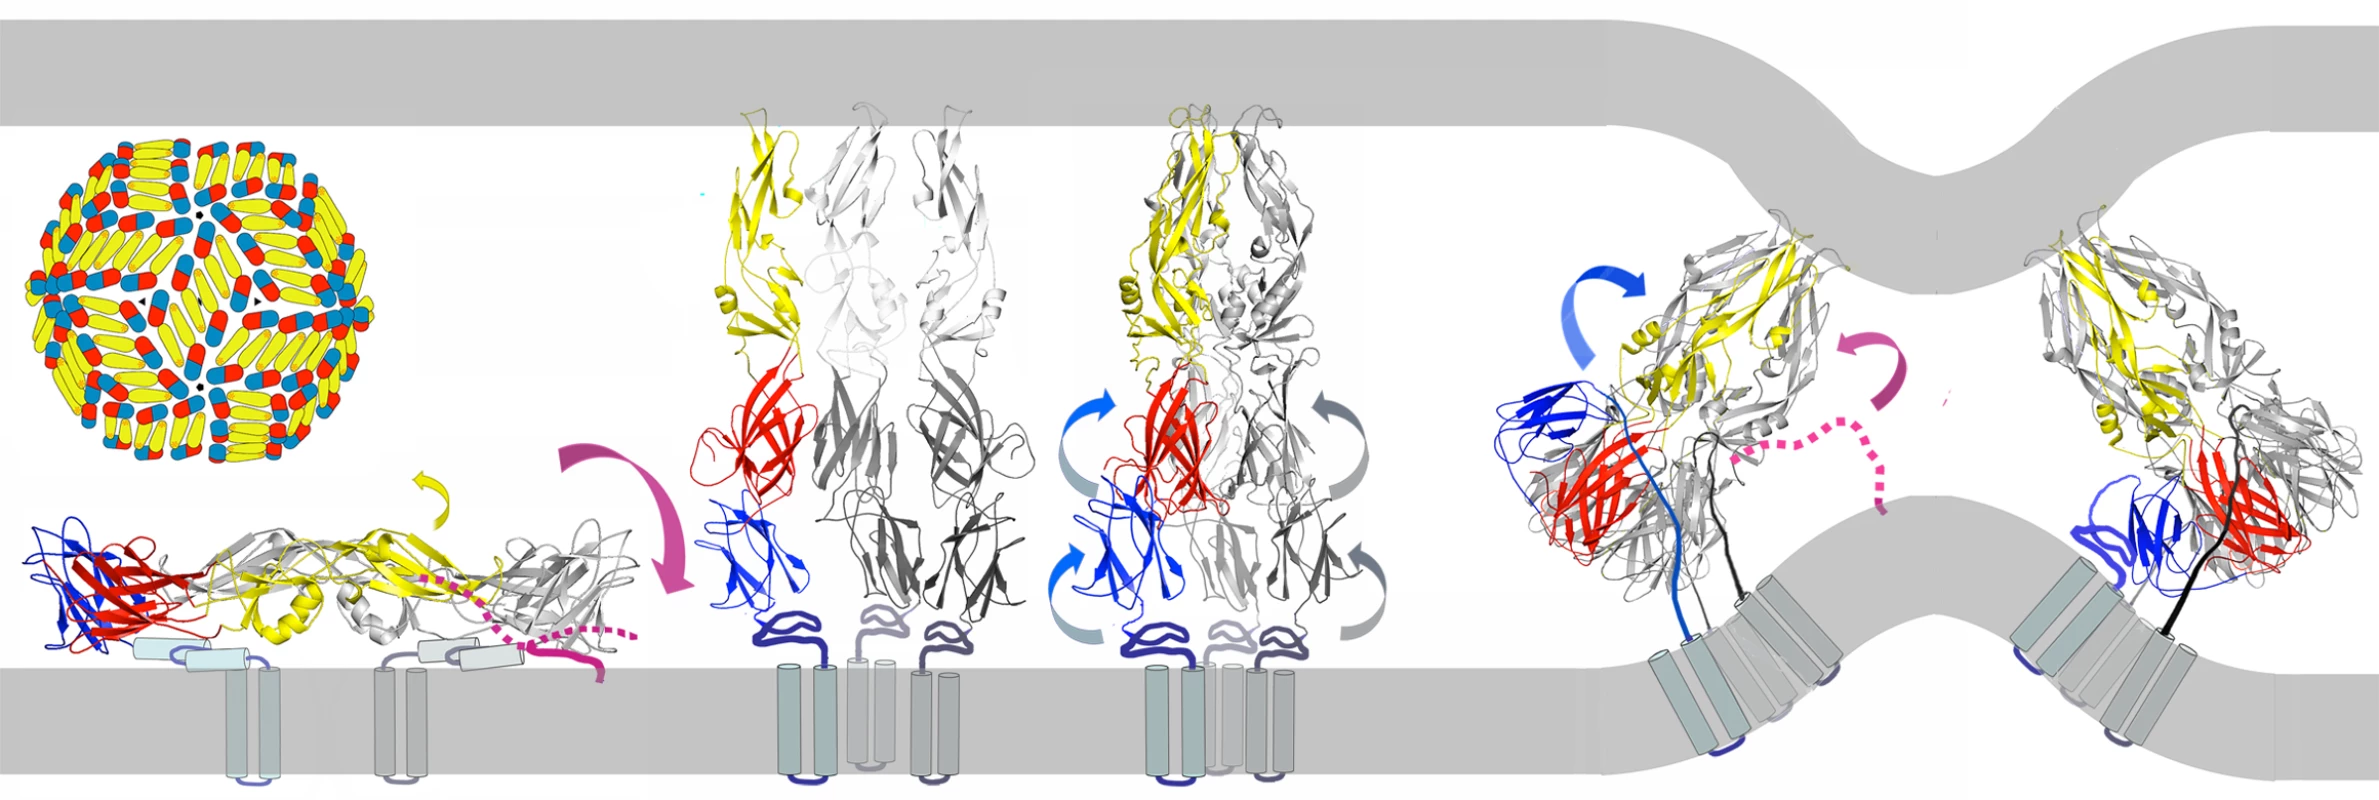 Model for inhibition of dengue-virus fusion by stem-derived peptides.